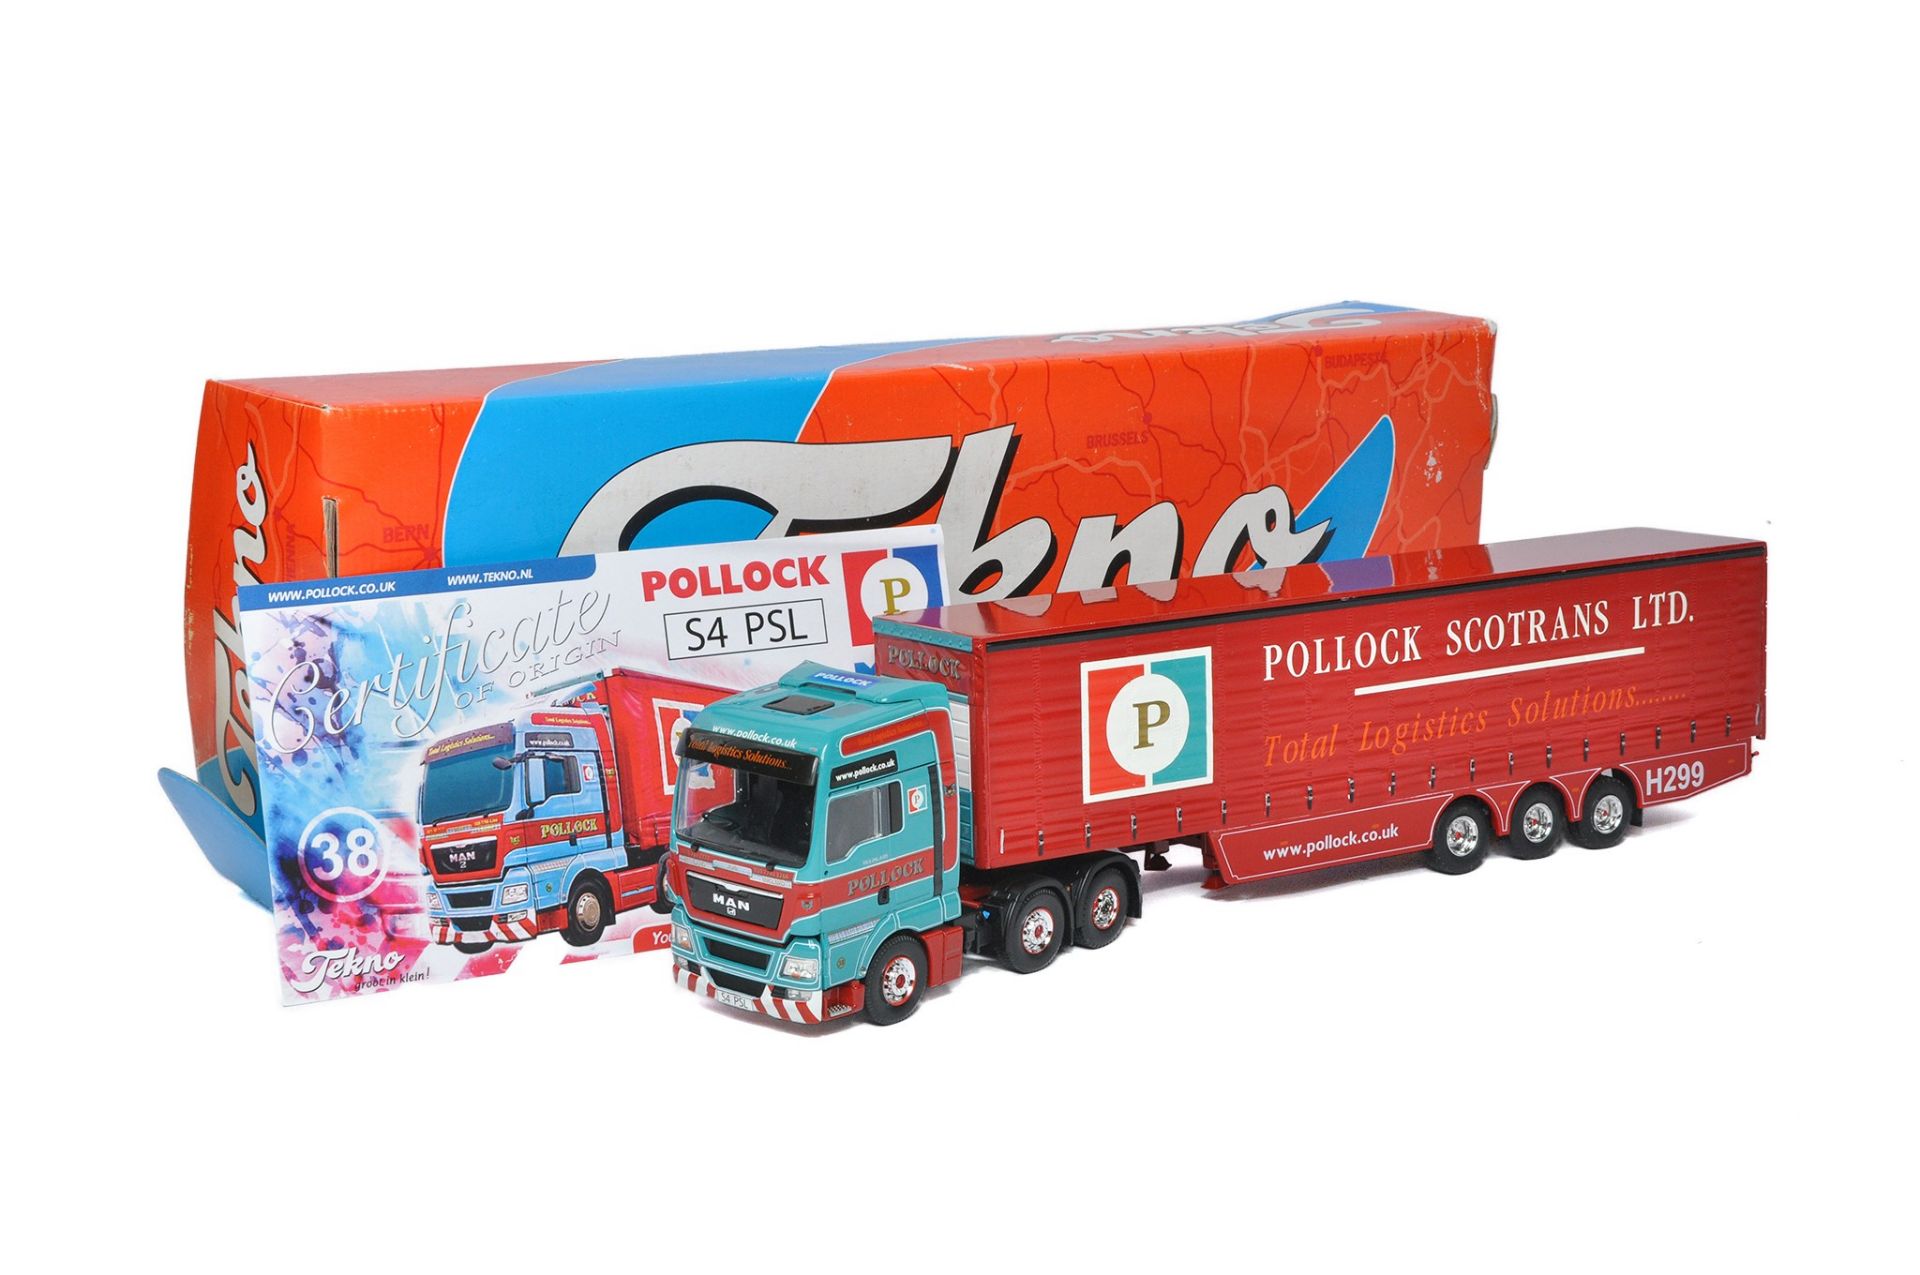 Tekno 1/50 diecast model truck issue comprising MAN Curtain Trailer in the livery of Pollock.